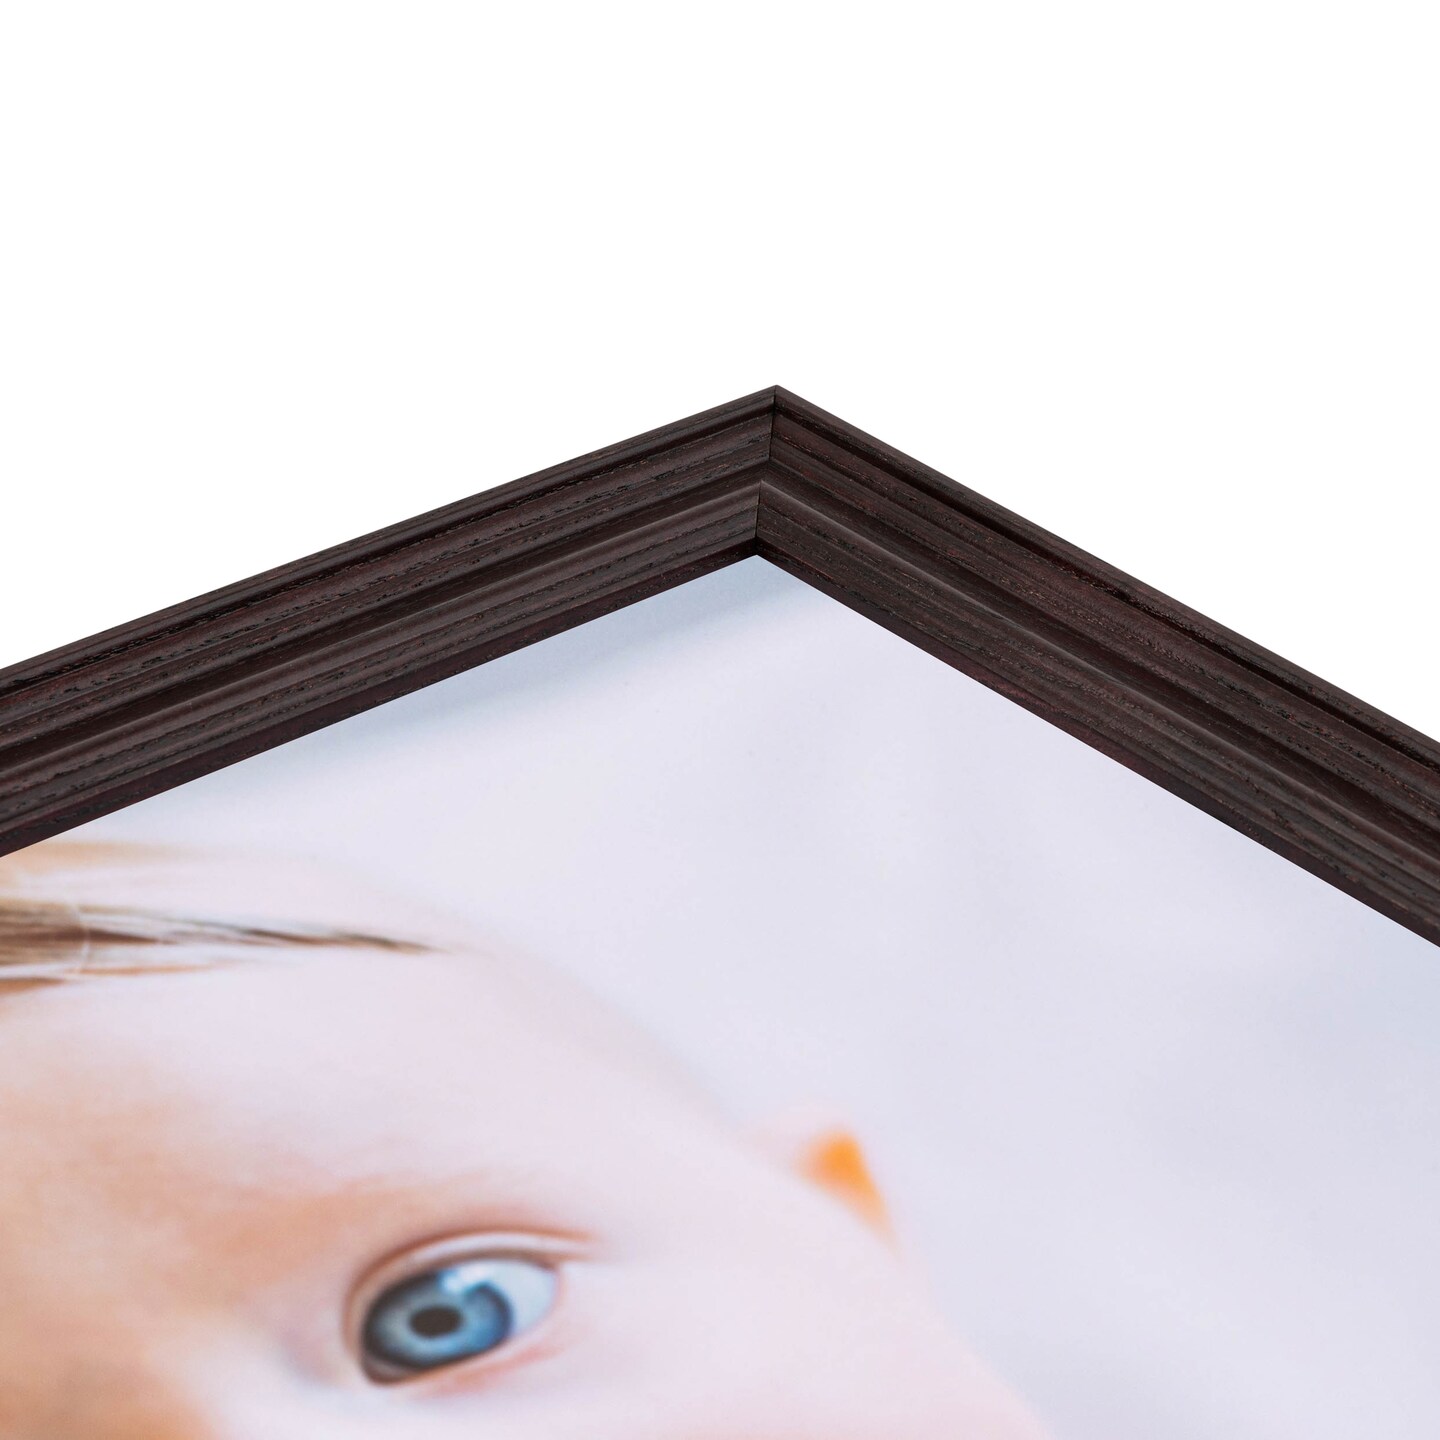 ArtToFrames 27x40 Inch  Picture Frame, This 1.5 Inch Custom Wood Poster Frame is Available in Multiple Colors, Great for Your Art or Photos - Comes with 060 Plexi Glass and  Corrugated Backing (A14ANJ)